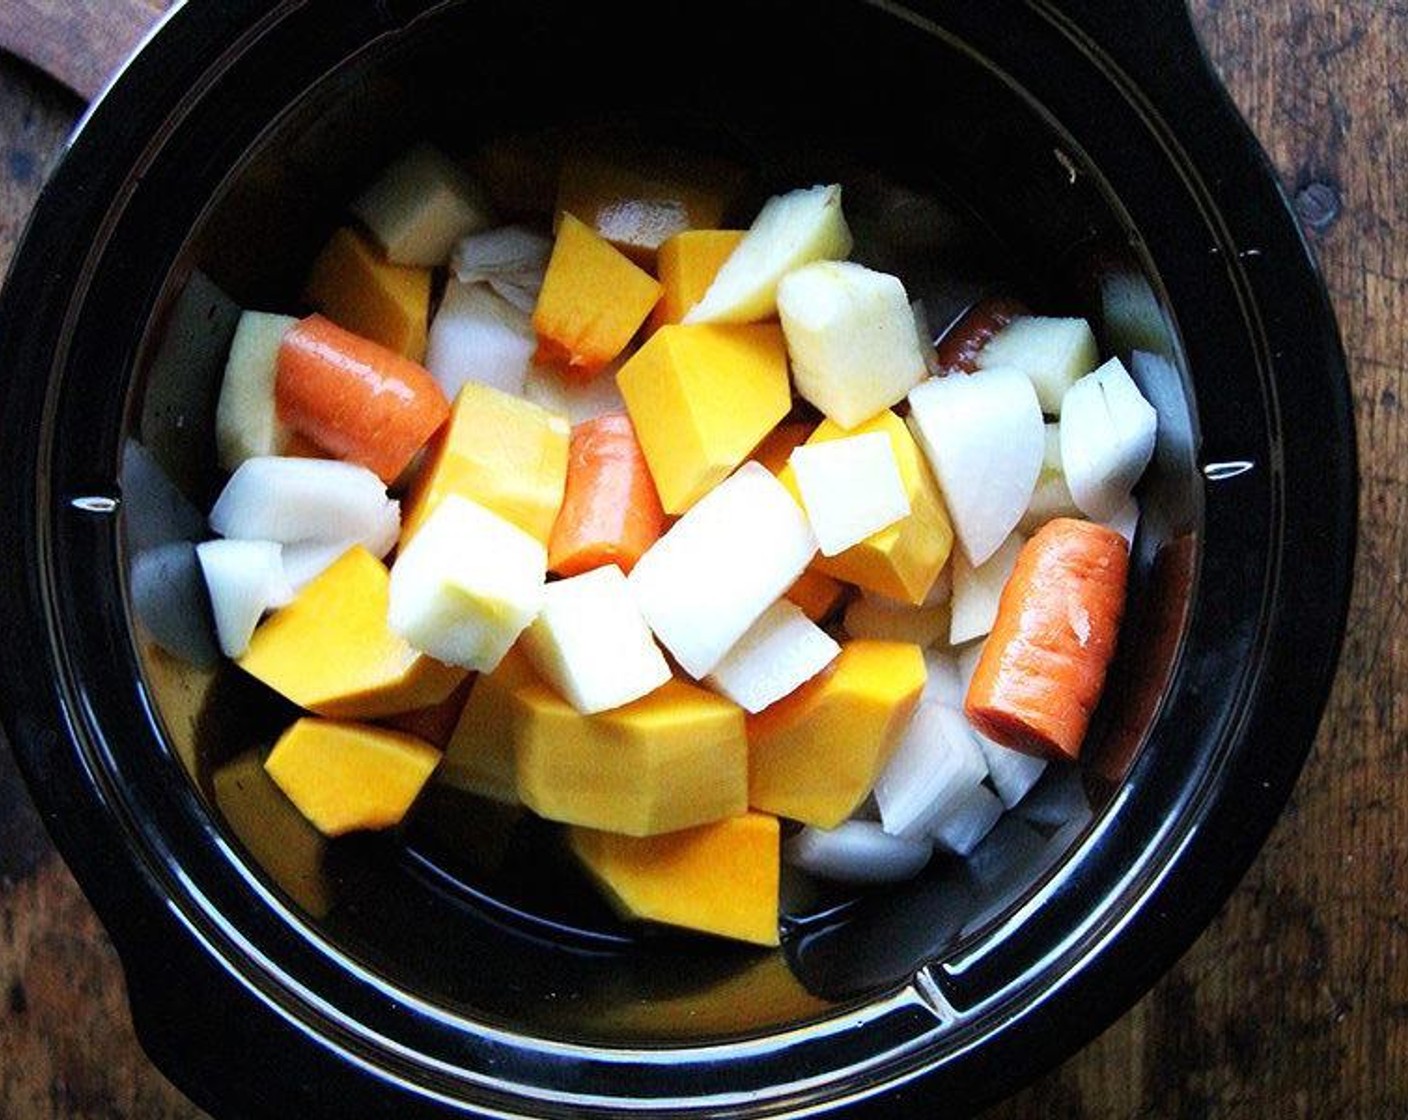 step 1 Place the Butternut Squash (6 1/2 cups), Onion (1), Apple (1), Carrot (1), and Water (2 1/2 cups) in a slow cooker. Add Kosher Salt (1 tsp). Cover and cook on high for 4 hours or on low for 8 hours, until the squash and carrots are cooked through.